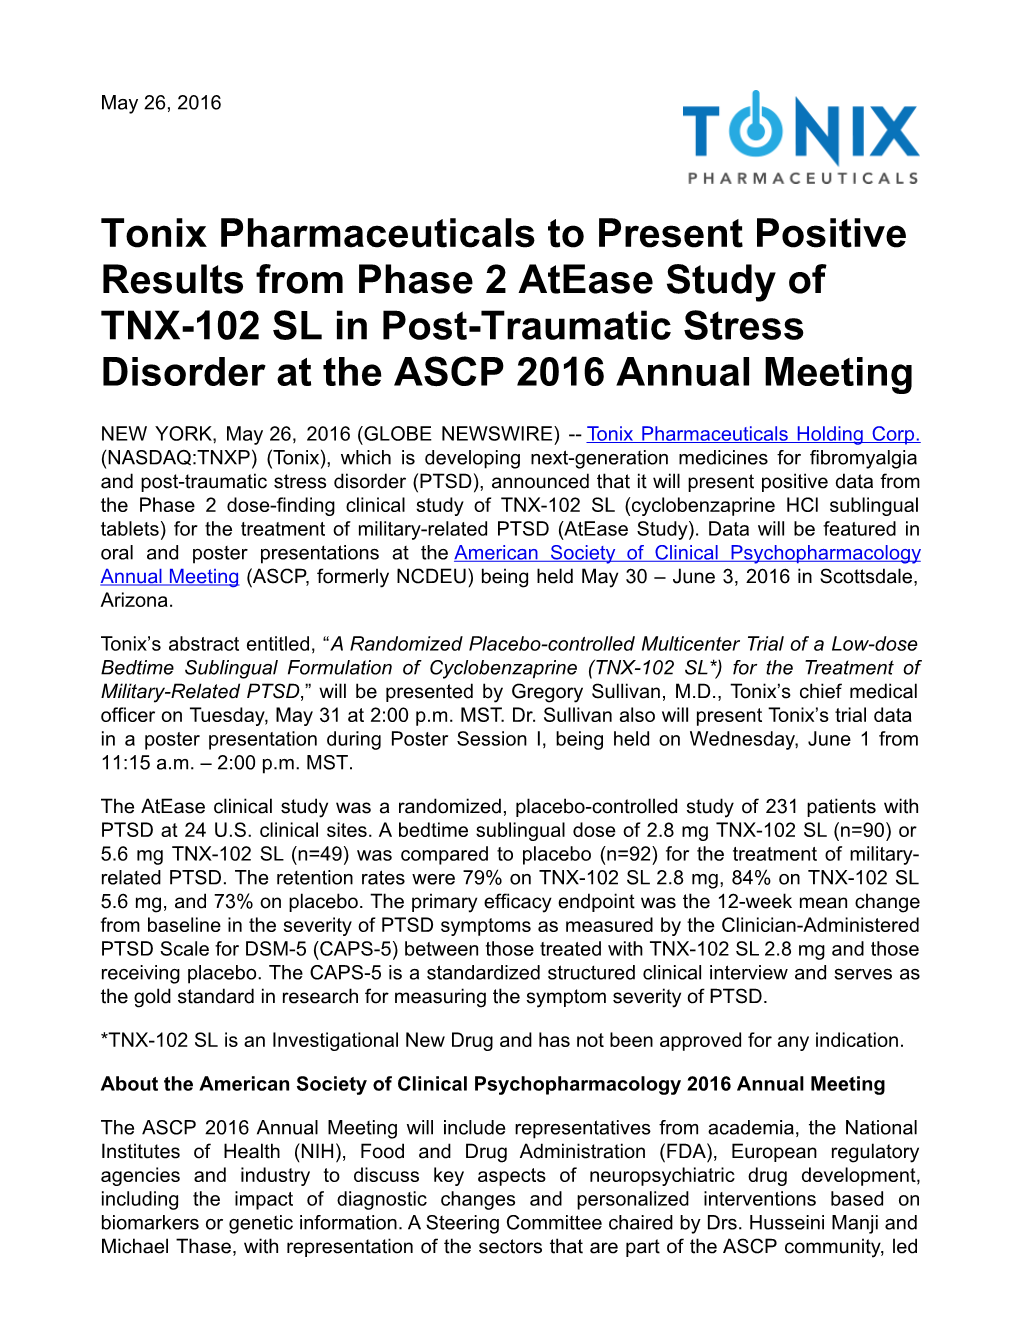 Tonix Pharmaceuticals to Present Positive Results from Phase 2 Atease Study of TNX-102 SL in Post-Traumatic Stress Disorder at the ASCP 2016 Annual Meeting